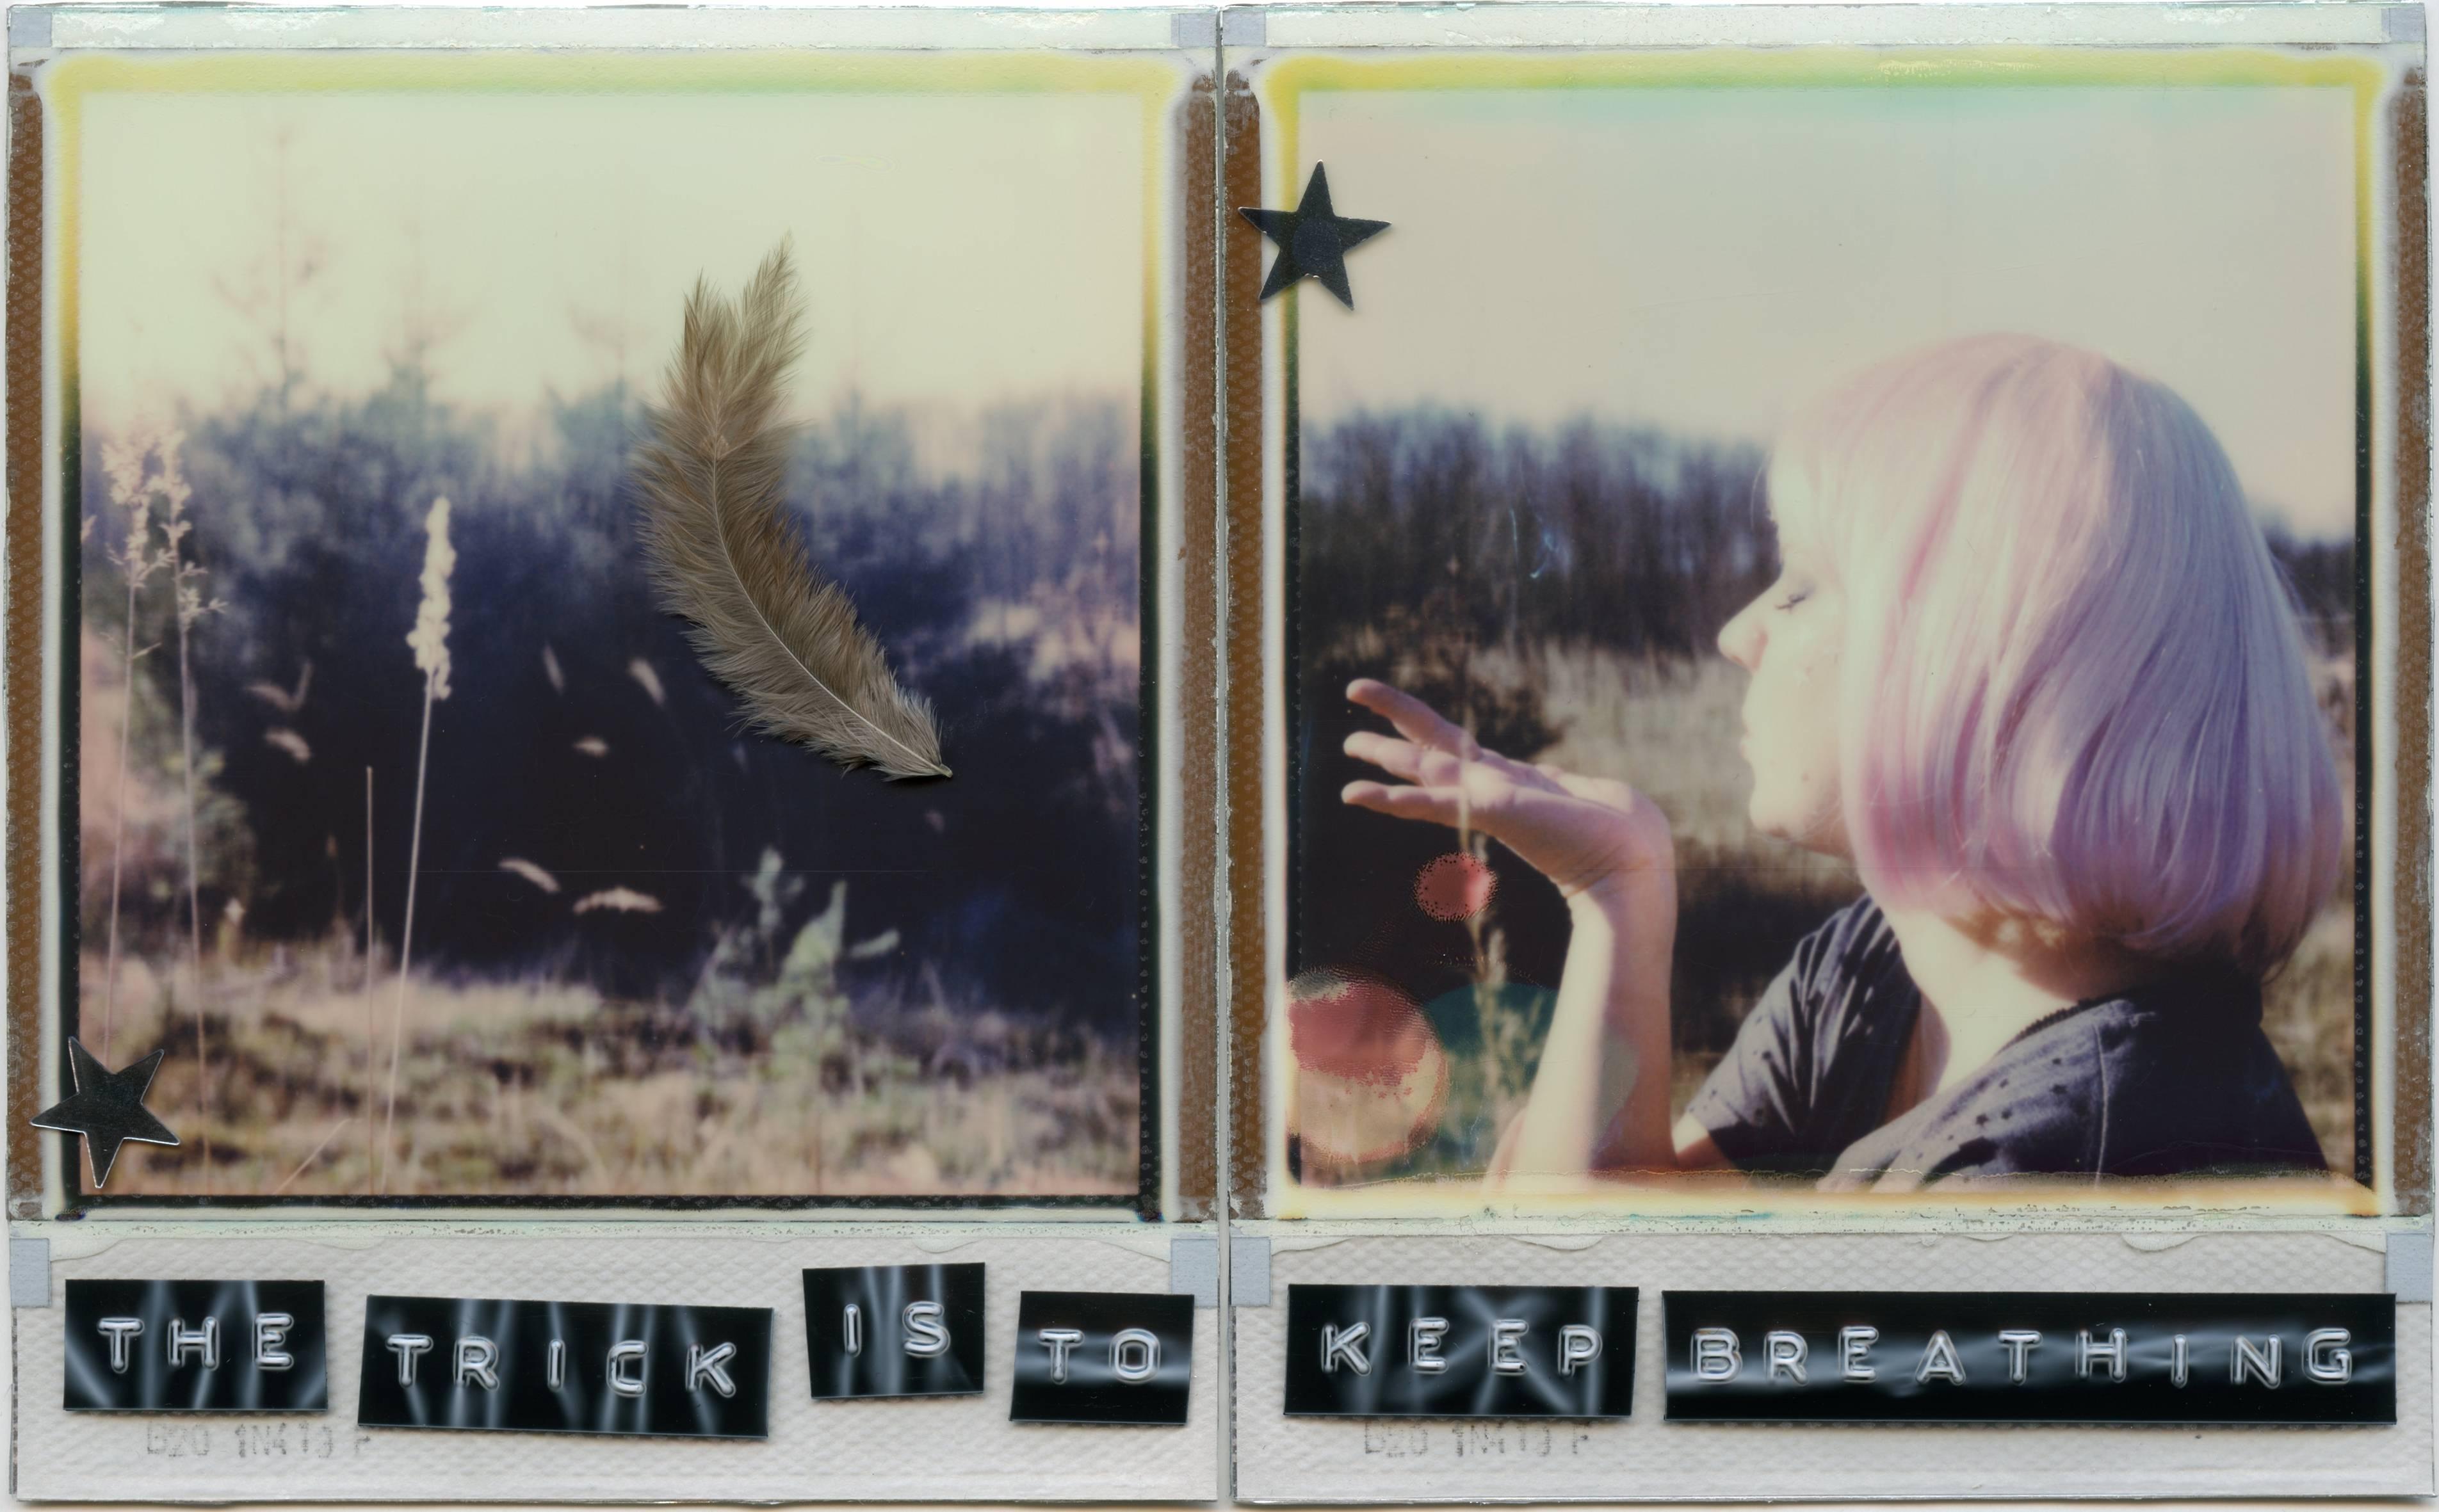 Julia Beyer Landscape Photograph - The Trick Is To Keep Breathing - based on 2 Polaroids